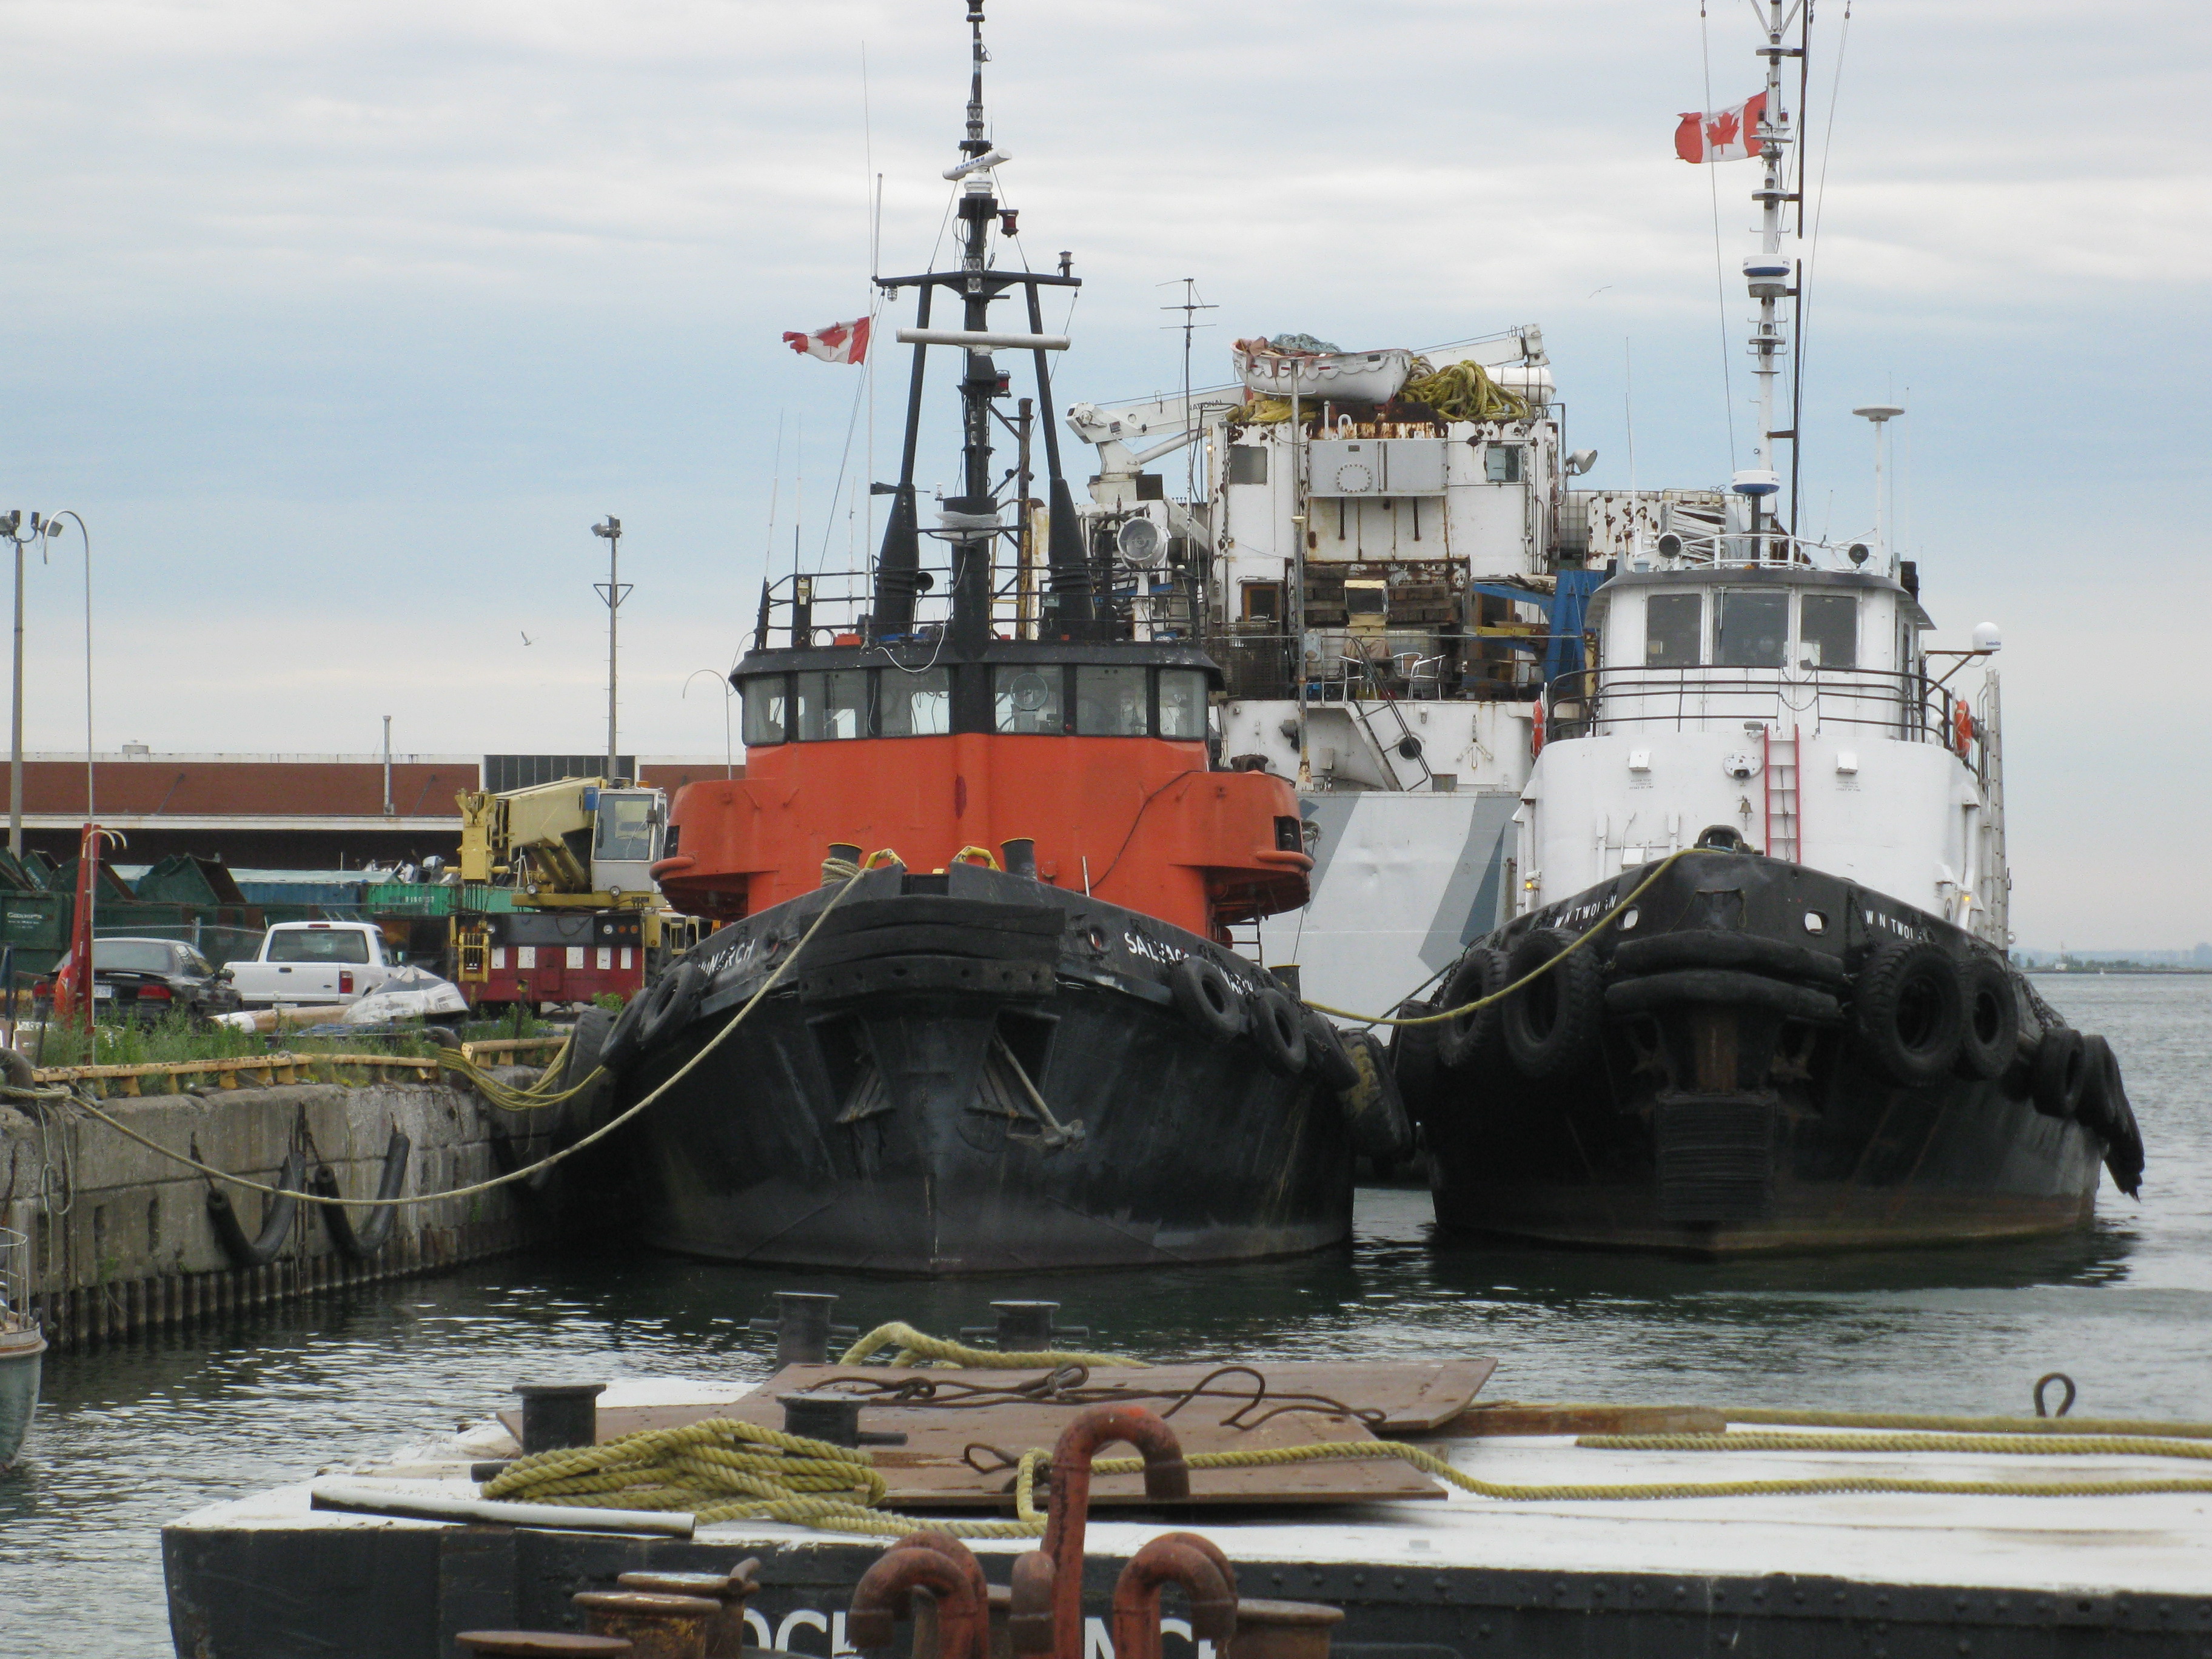 Two tugs in the keating channel -c.jpg photo